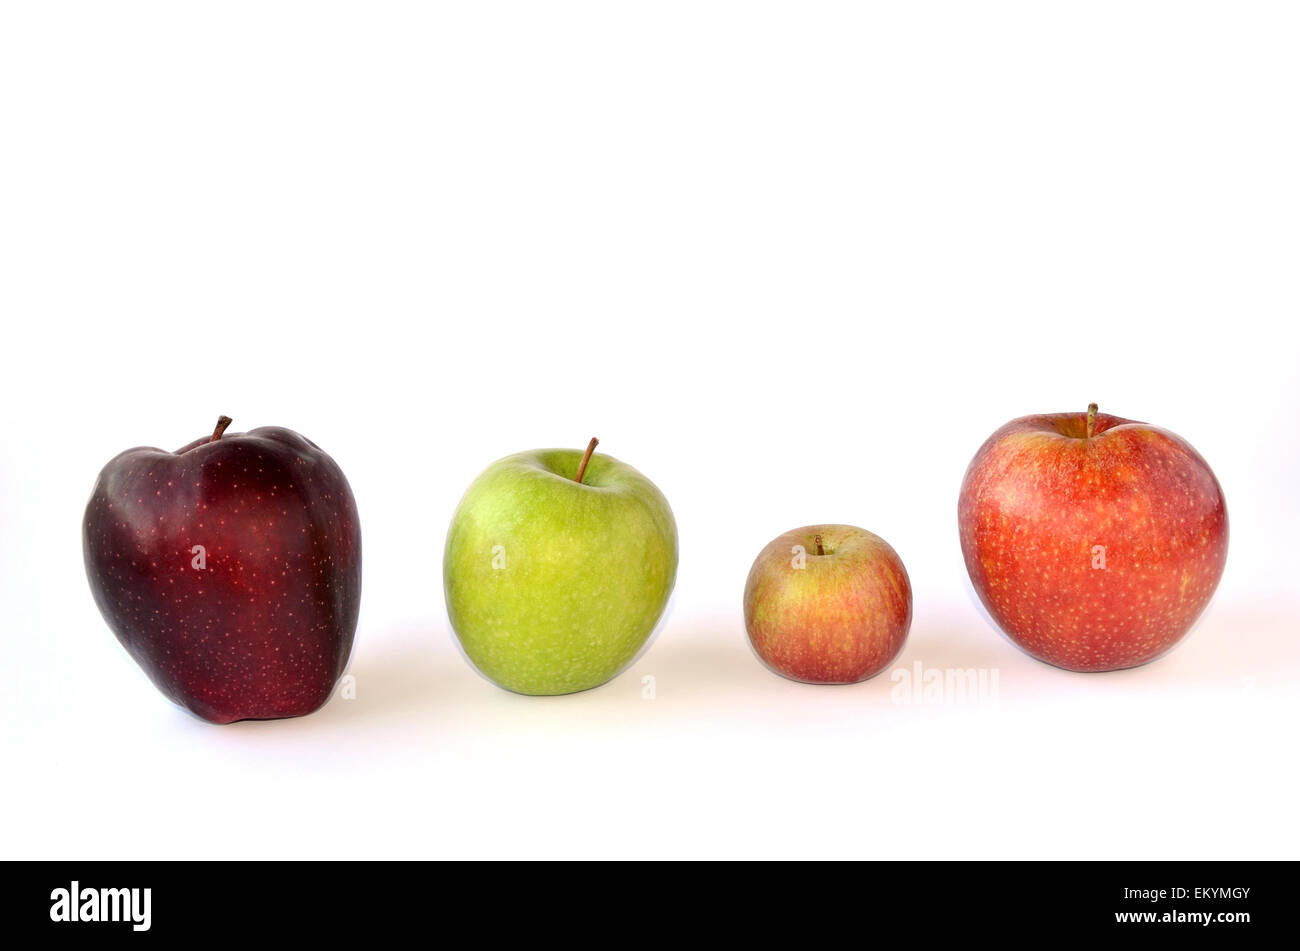 Four different apples - respect differences Stock Photo